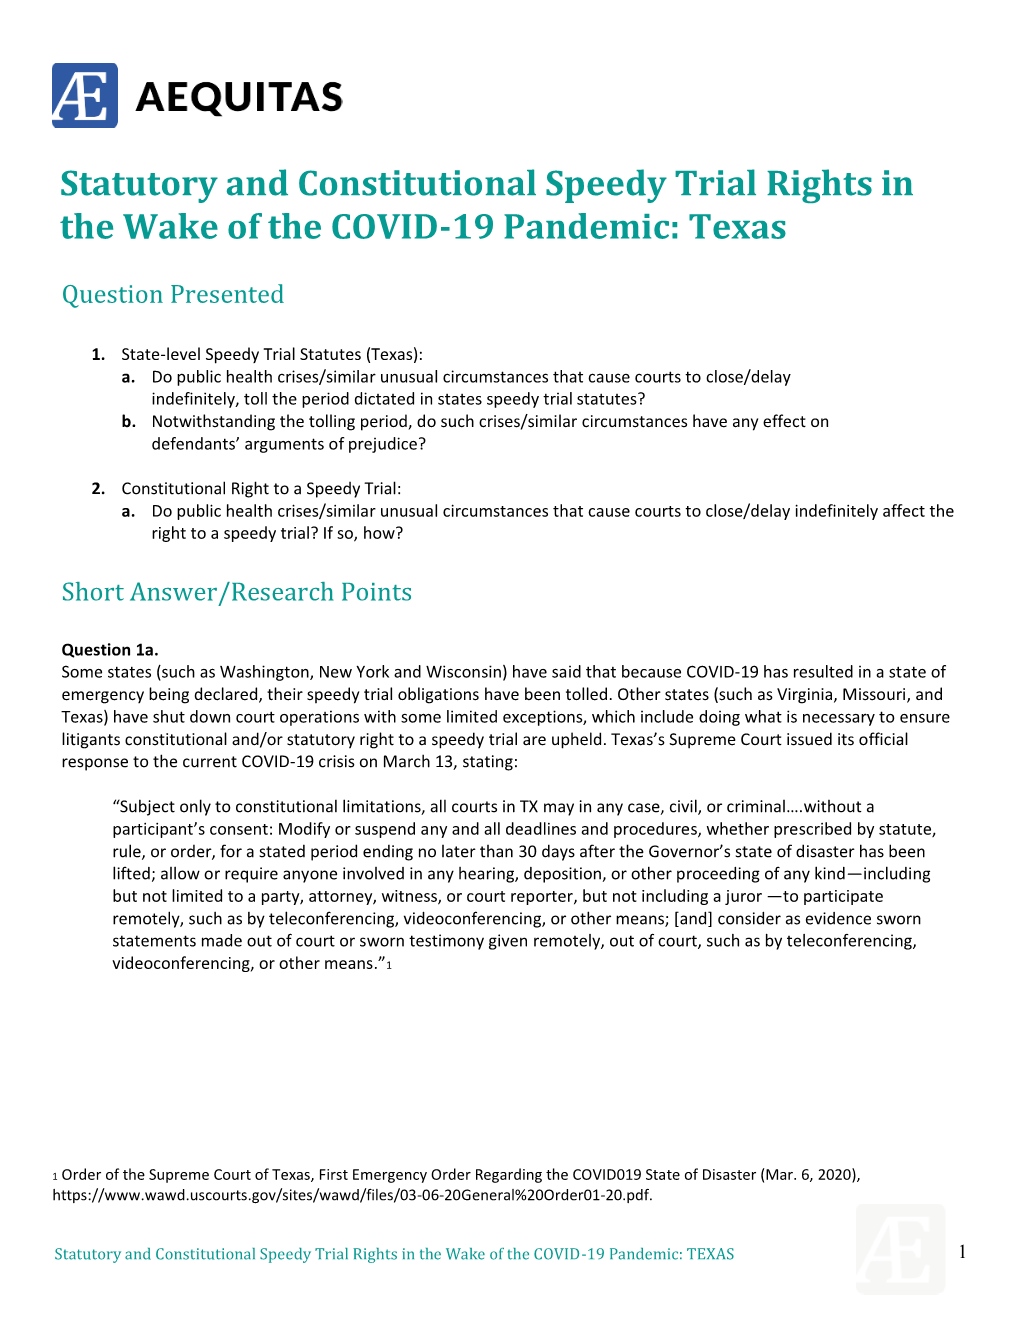 Statutory and Constitutional Speedy Trial Rights in the Wake of the COVID-19 Pandemic: Texas